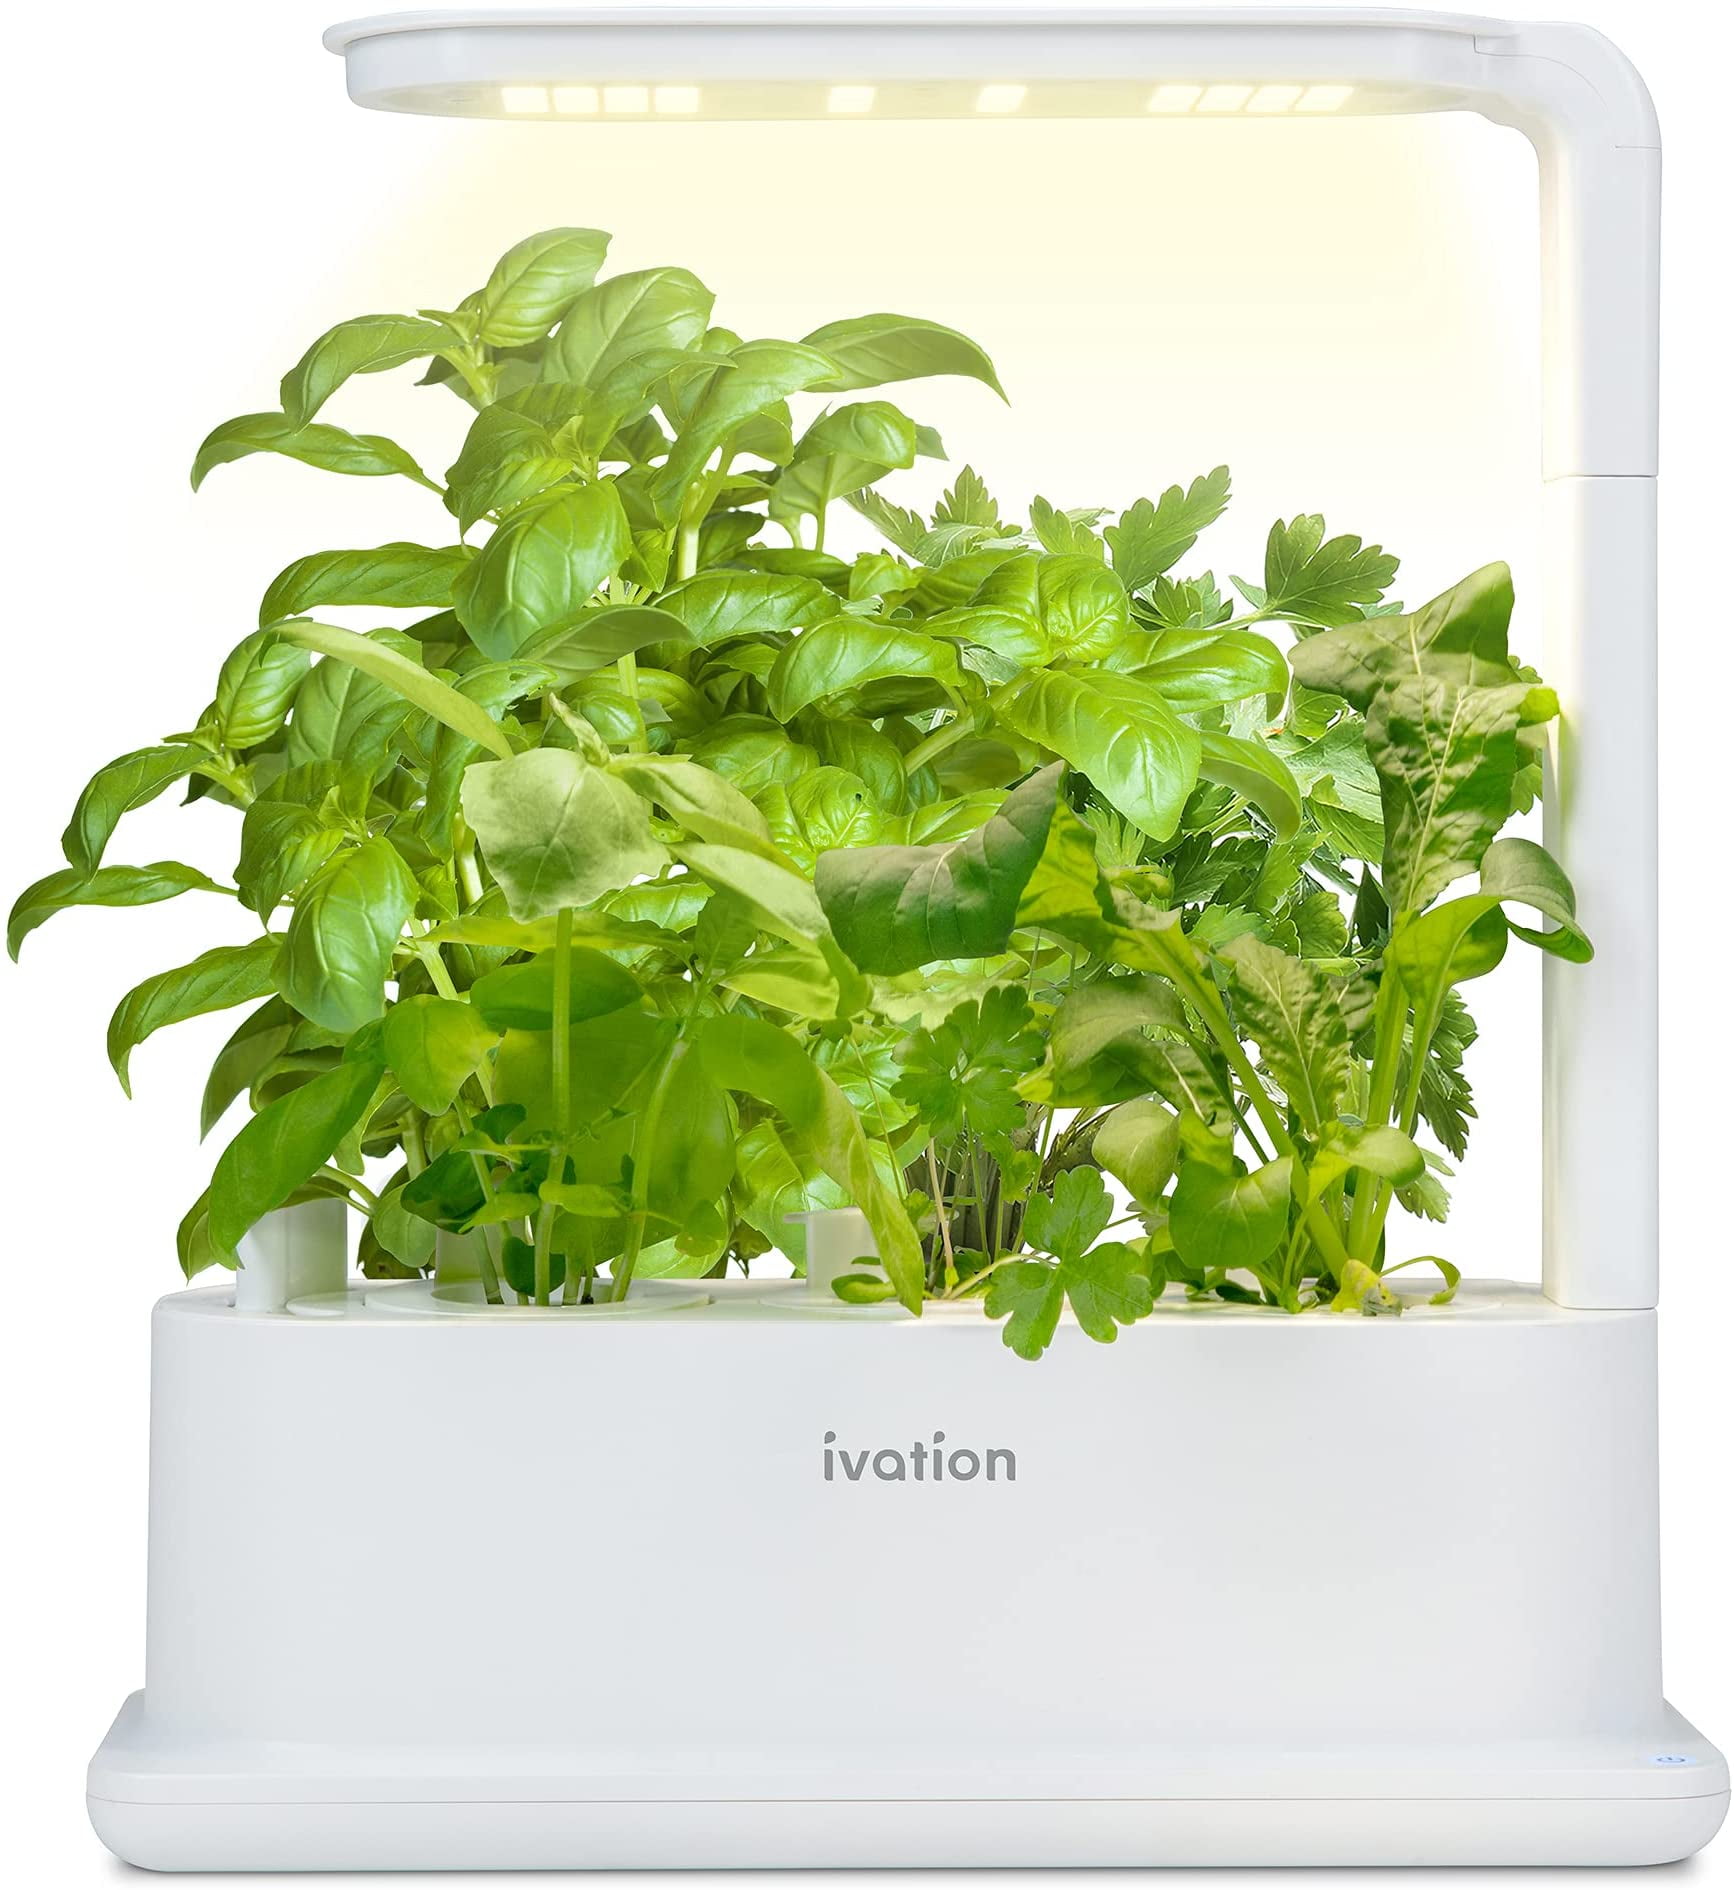 2 PLANT INDOOR HERB GARDEN DECOR HYDROPONIC GROW SYSTEM BUBBLE TUB ONLY 